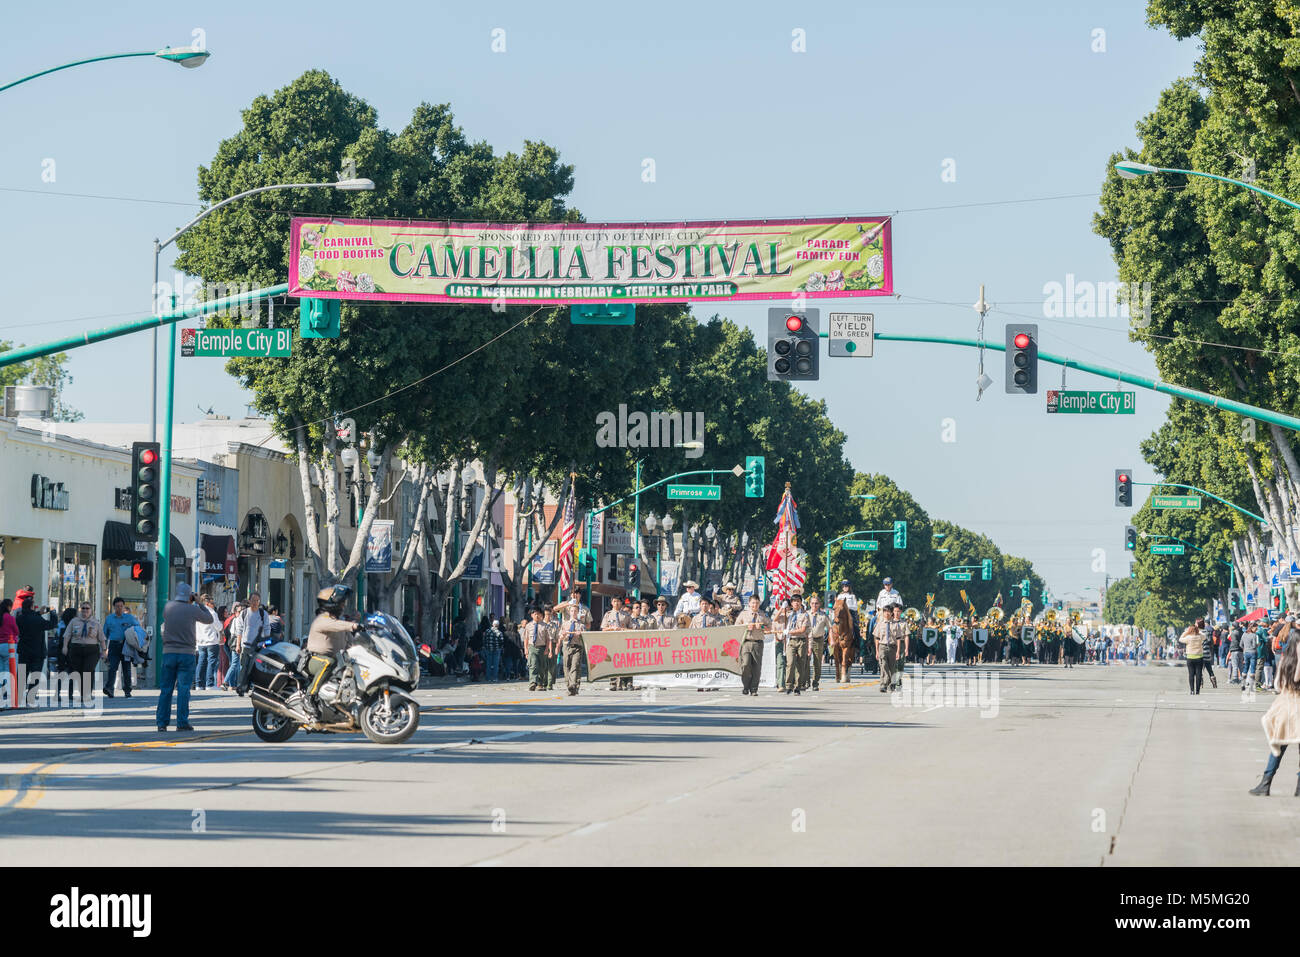 Temple City, Los Angeles, USA. 24th February, 2018. Scouts of the famous 74th Camellia Festival Parade on FEB 24, 2018 at Temple City, Los Angeles County, California Credit: Chon Kit Leong/Alamy Live News Stock Photo